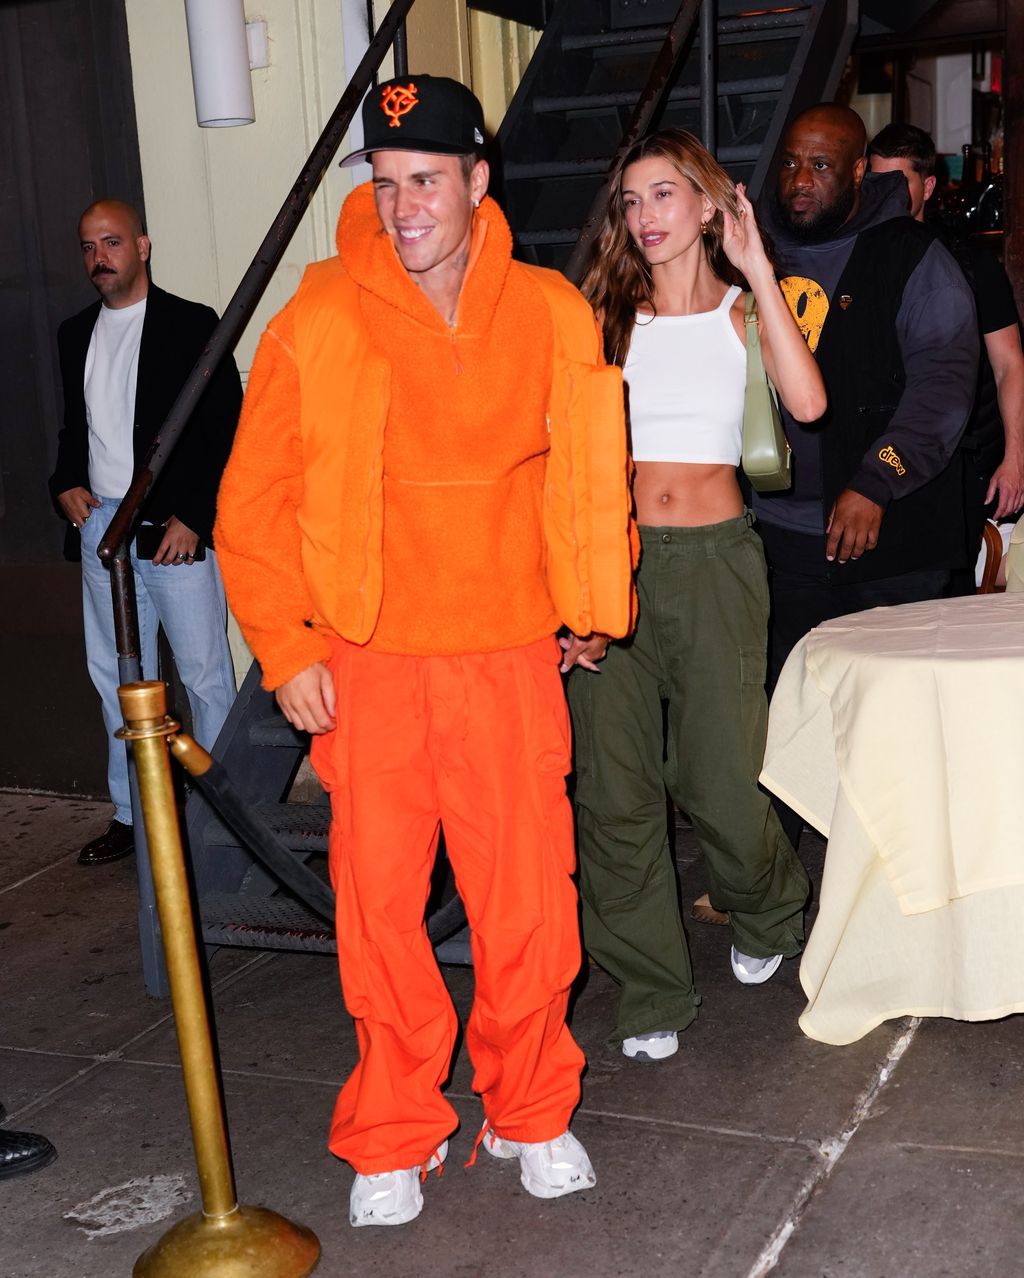 NEW YORK, NEW YORK - JUNE 04: Justin Bieber and Hailey Bieber are seen at Cipriani after his concert at Barclays Center on June 04, 2022 in New York City. (Photo by Gotham/GC Images)